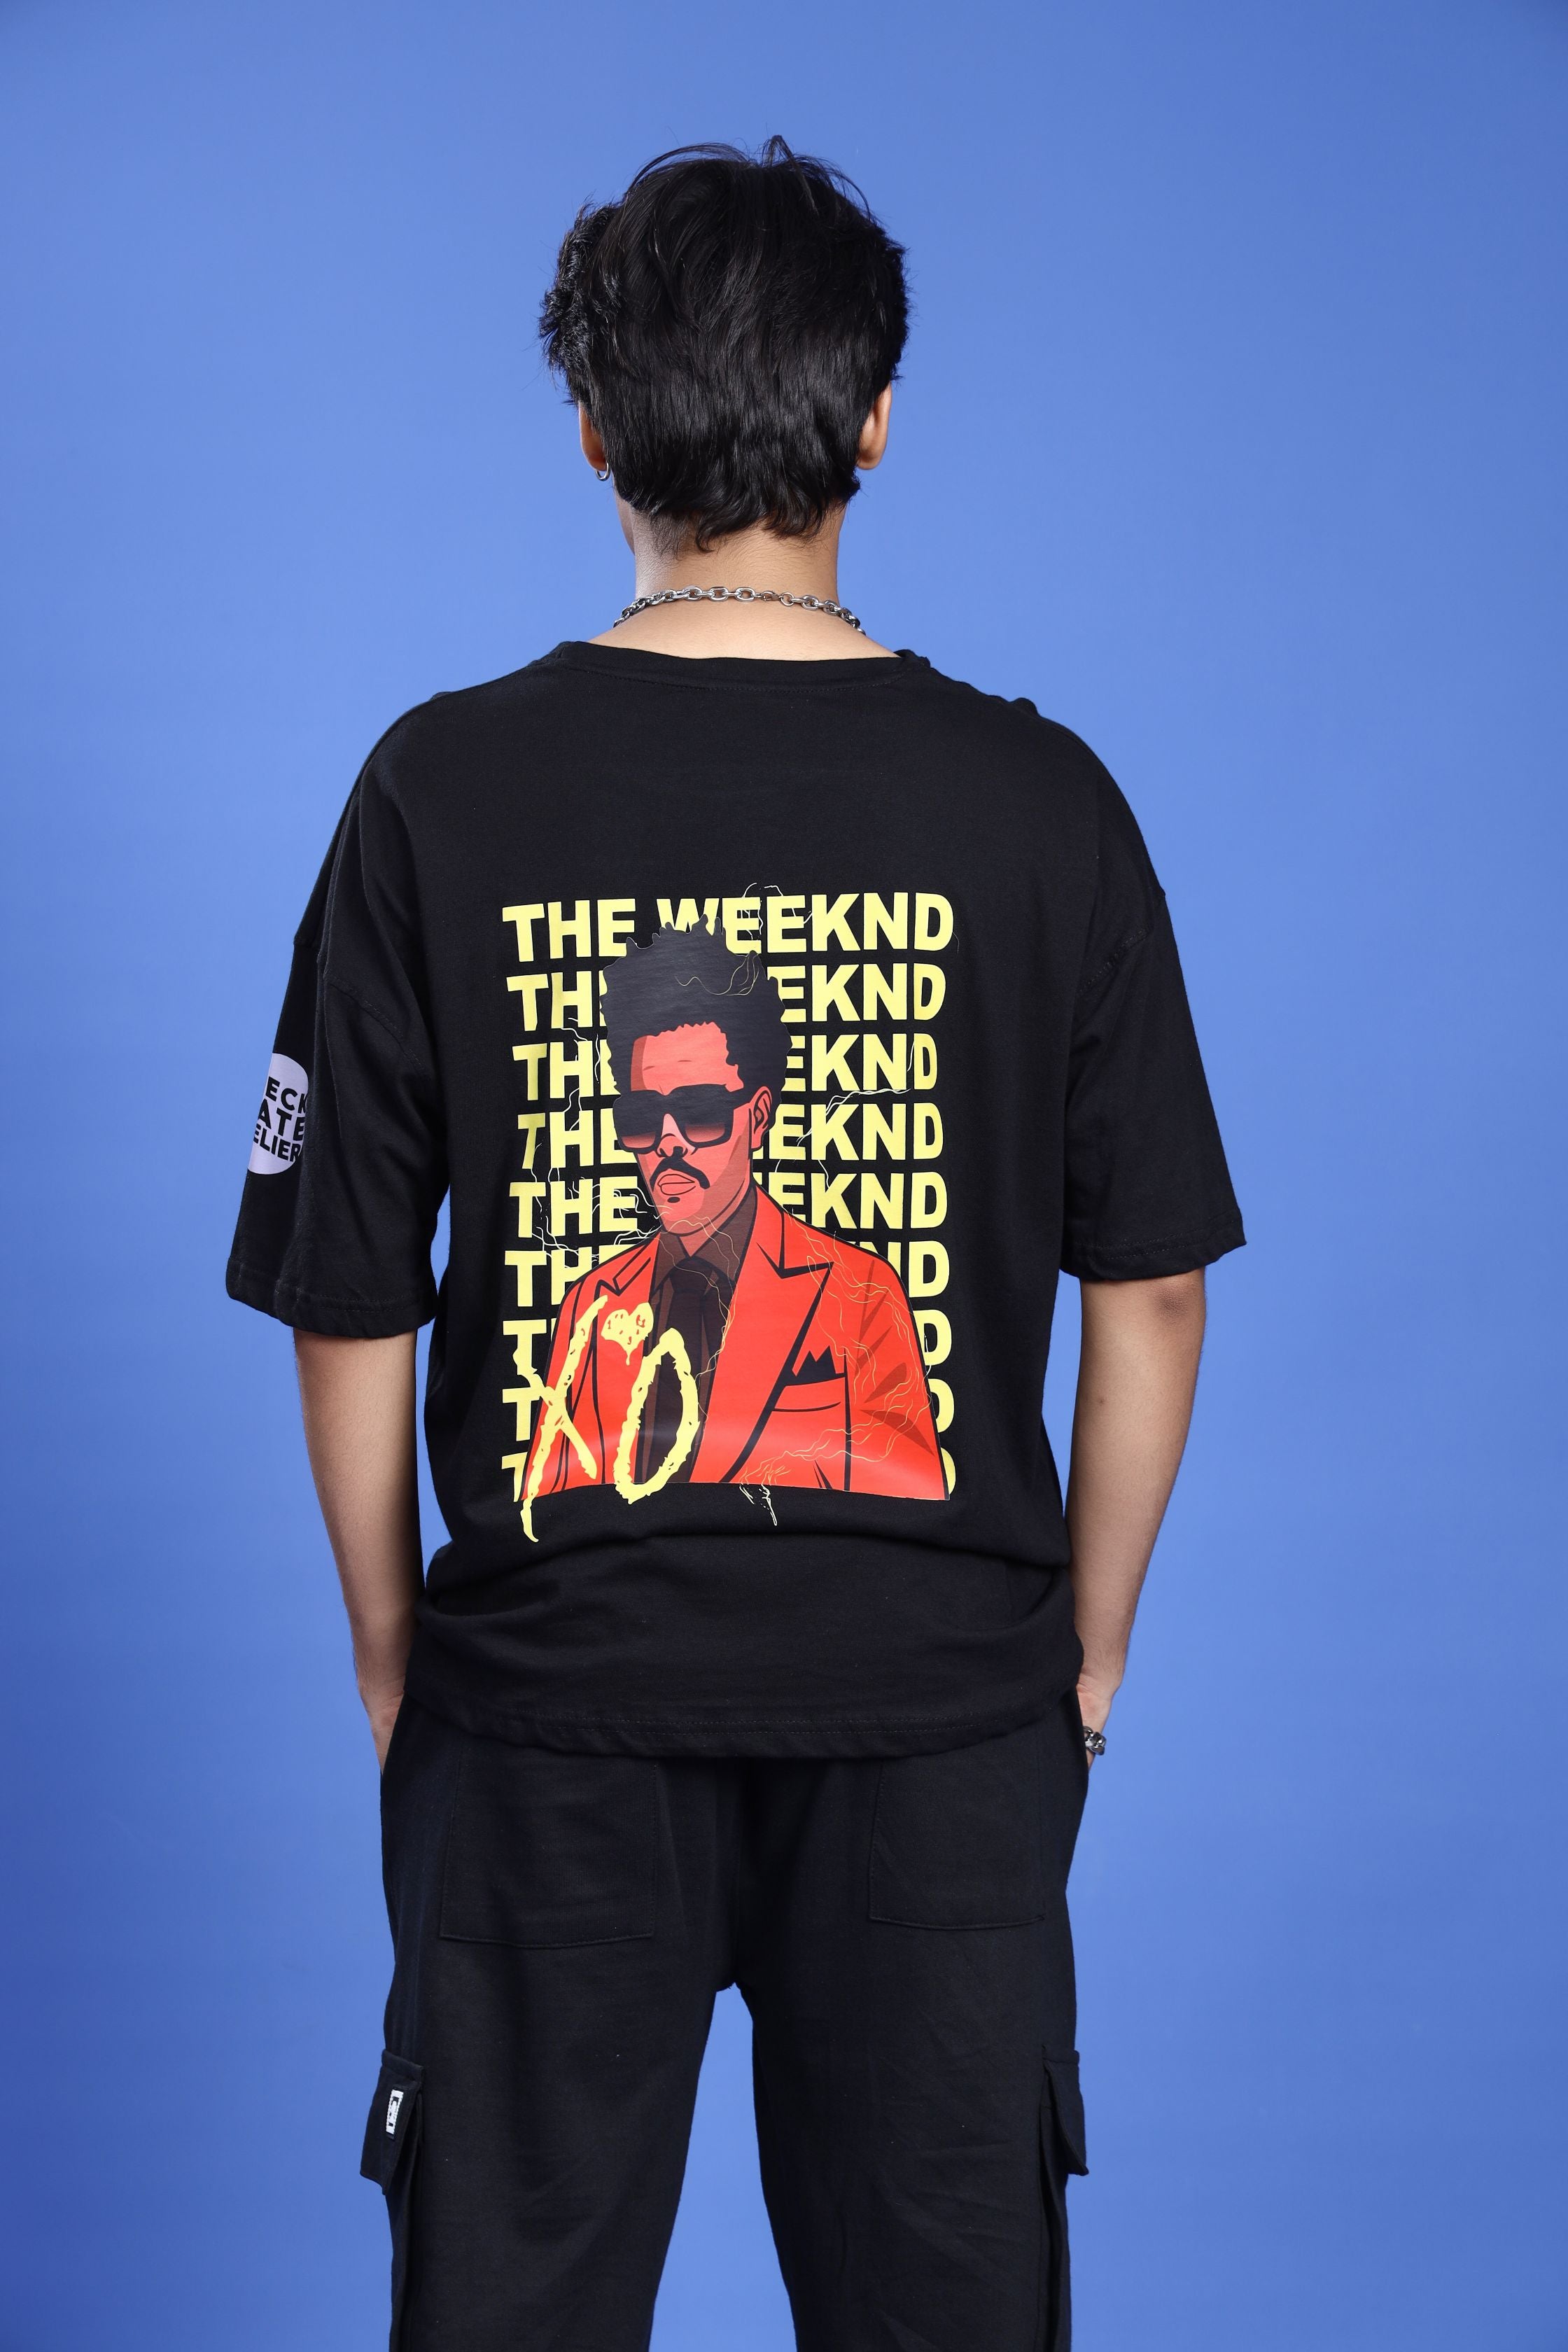 THE WEEKND OVERSIZED T-SHIRT - Shop Now - Checkmate Atelier